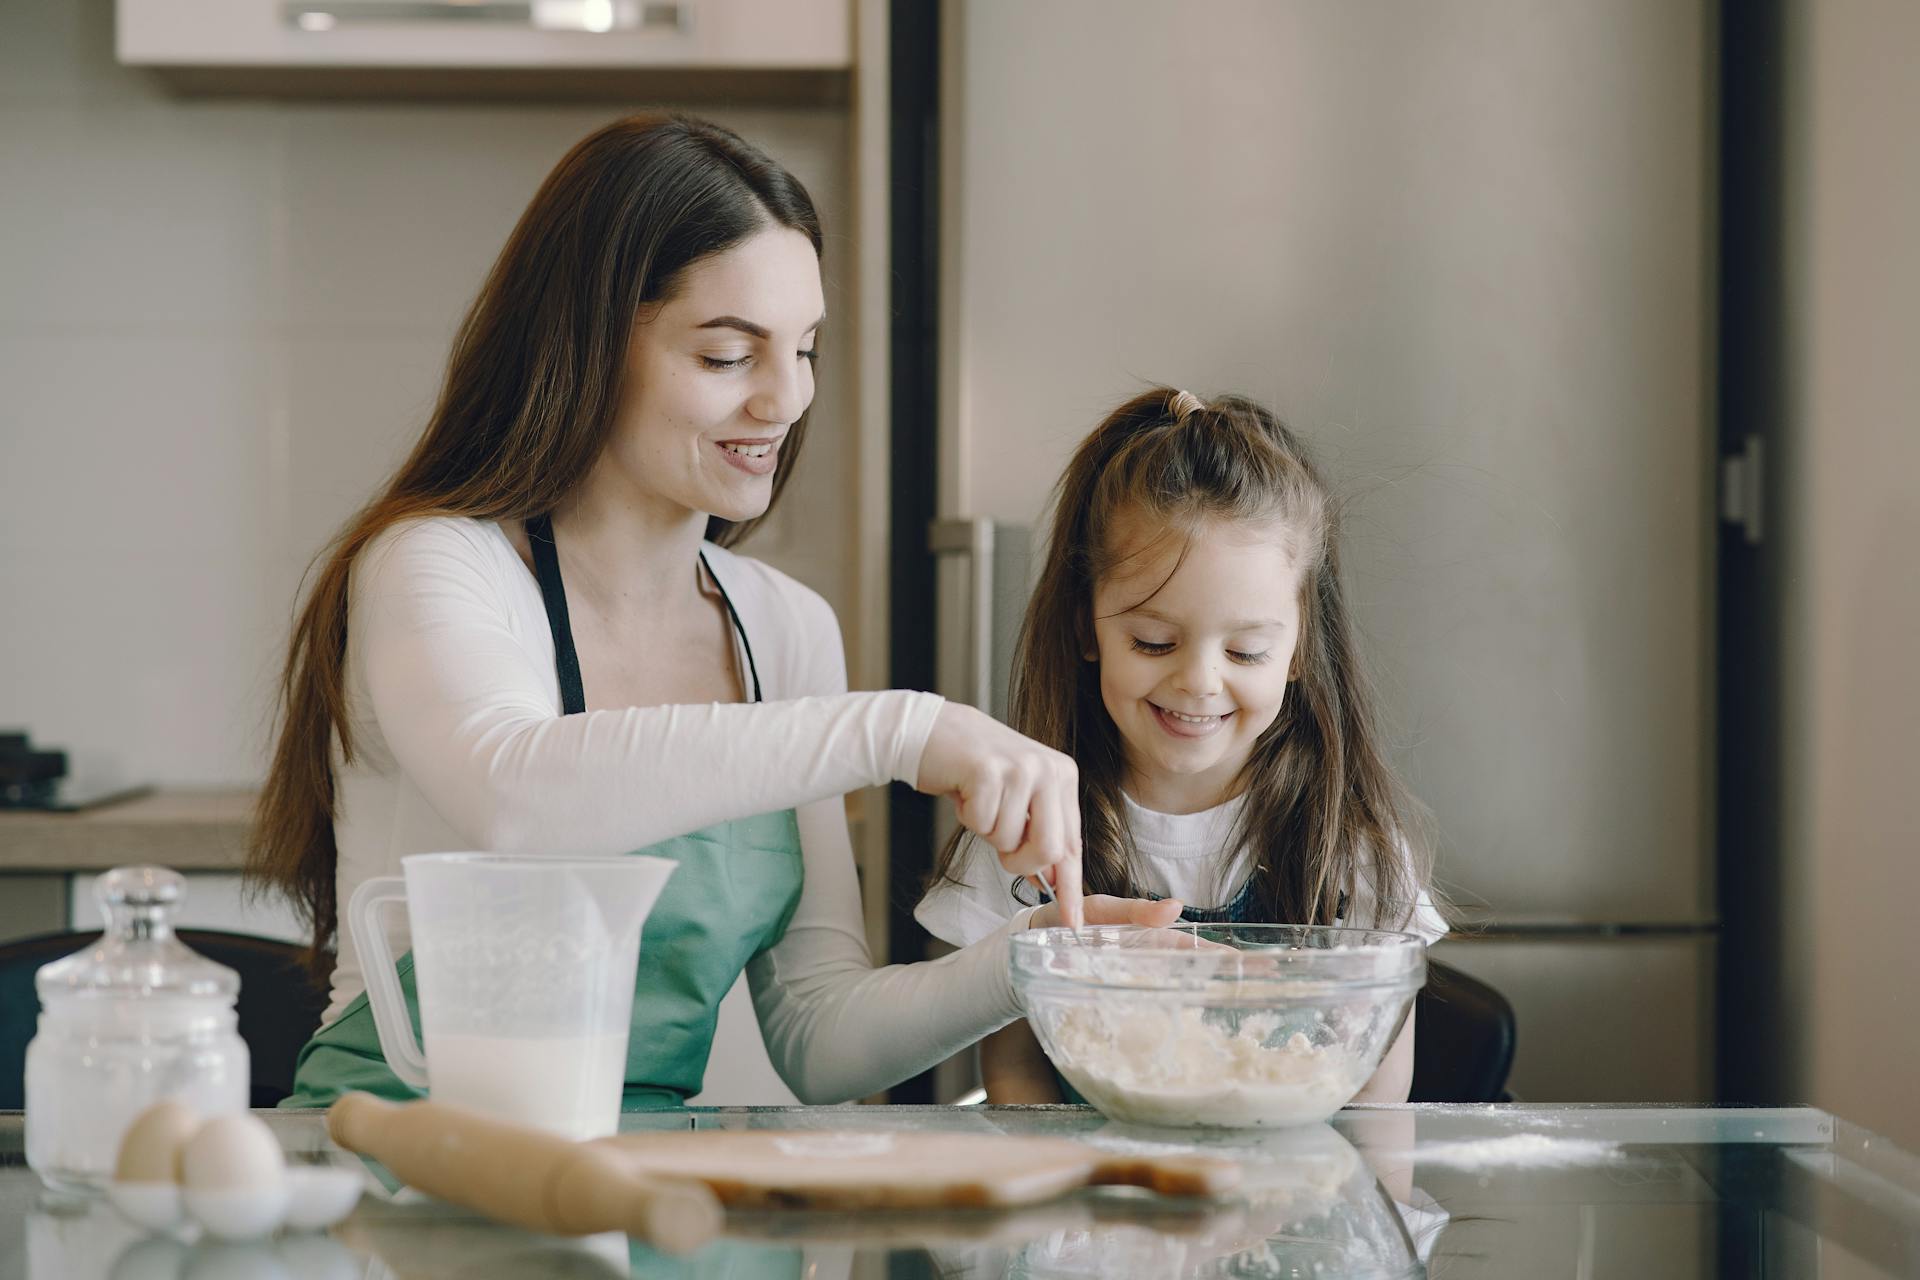 Mother and daughter baking | Source: Pexels